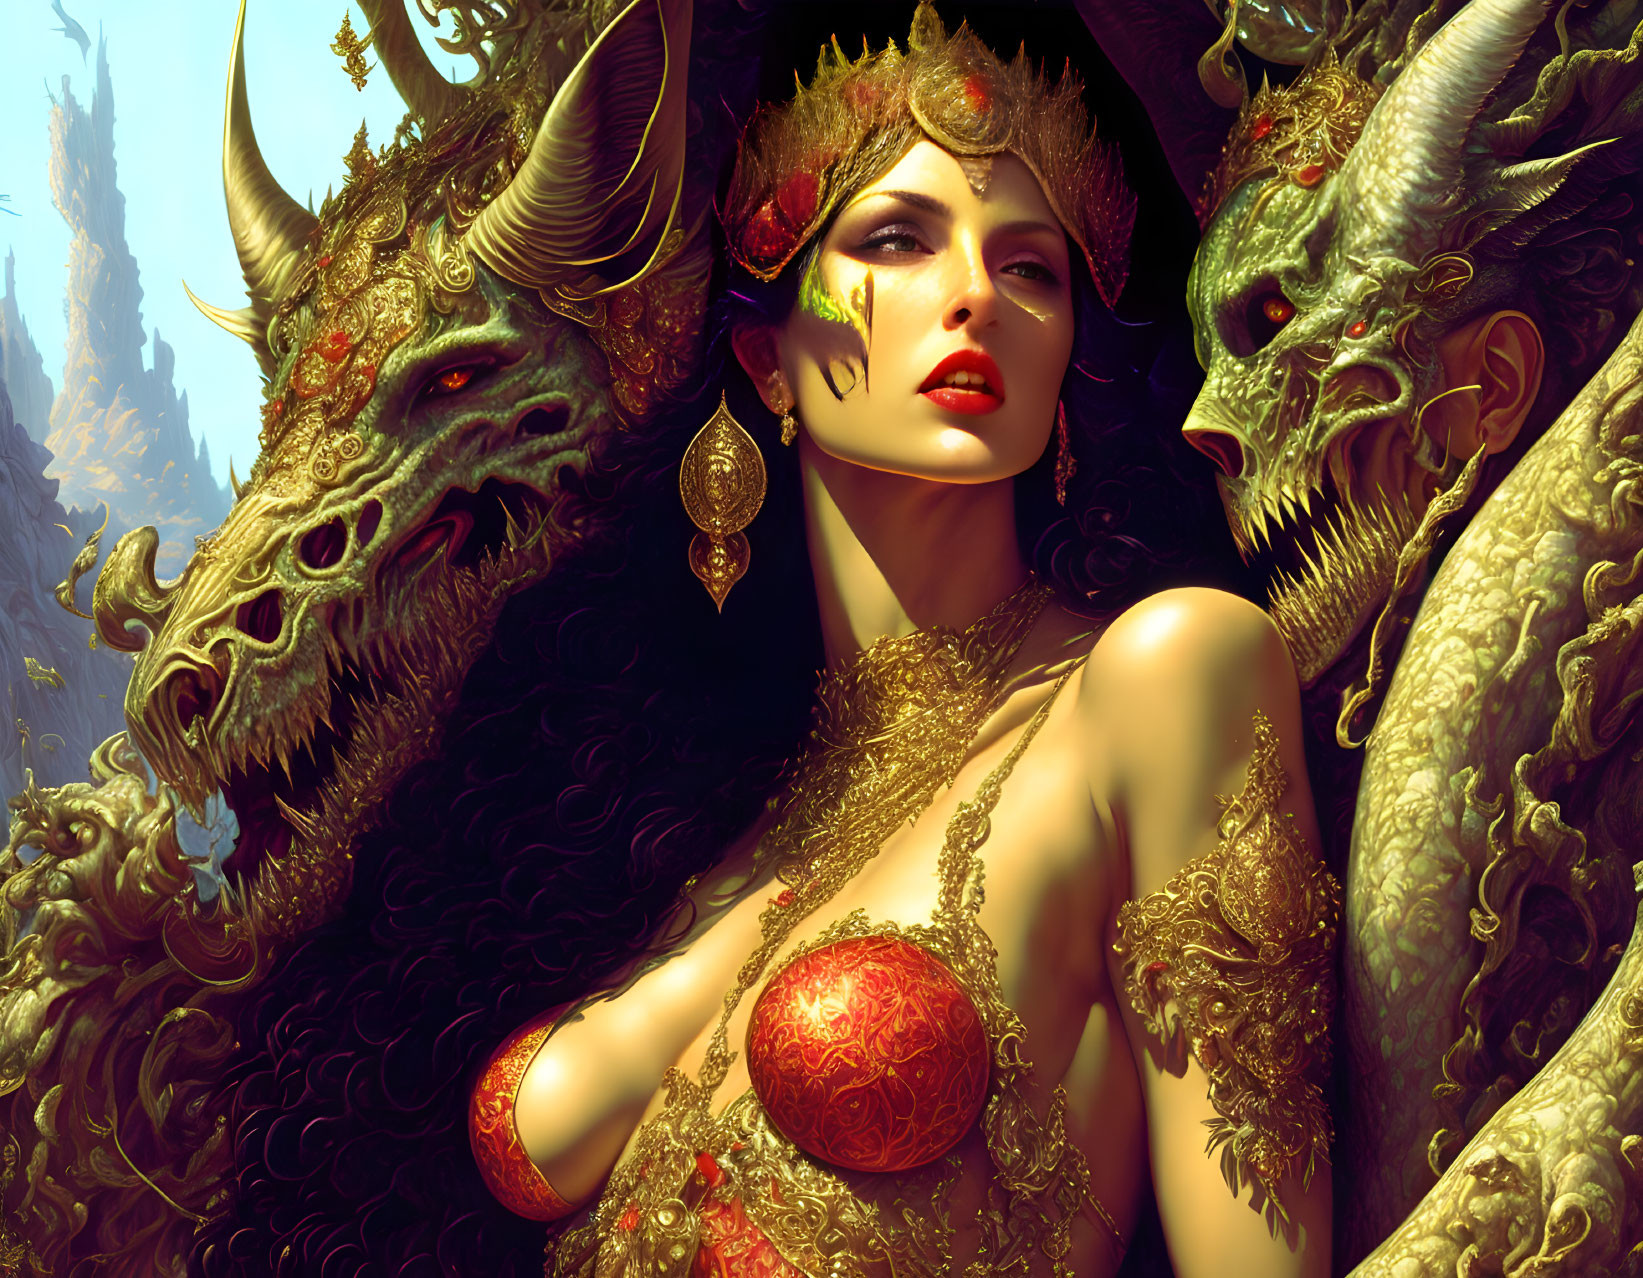 Fantasy-themed artwork featuring majestic woman, crown, and golden horned beasts